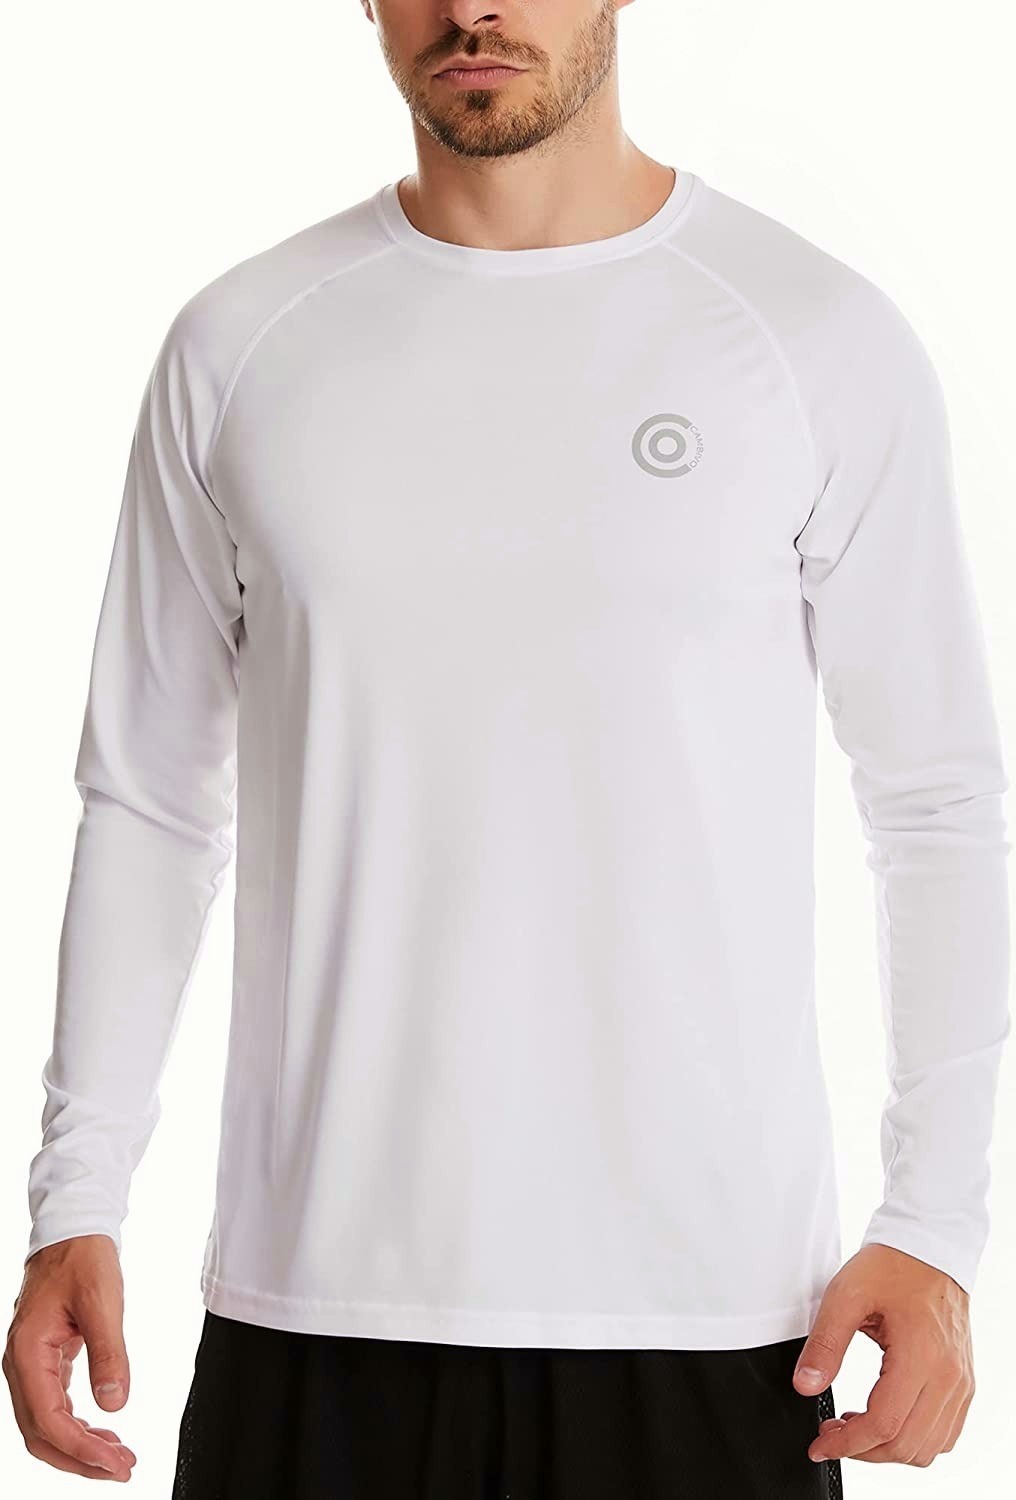 CAMBIVO UPF 50+ Long Sleeve Fishing Shirts for Men (Gray, White) $6.99 + Free Shipping w/ Prime or on $25+